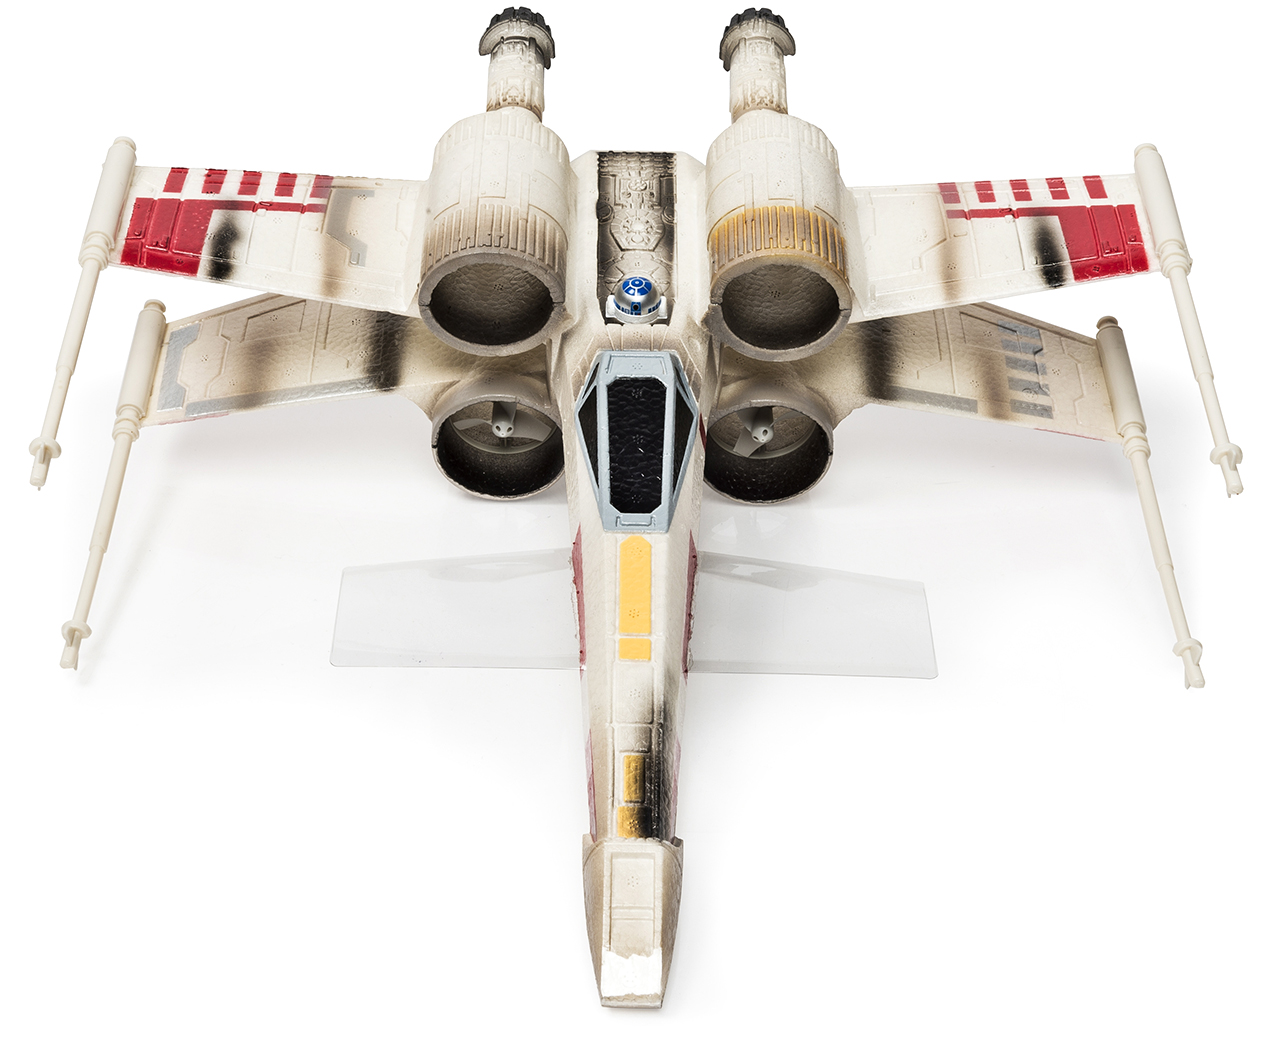 You Can Finally Pilot Your Own Flying Millennium Falcon And X-Wing